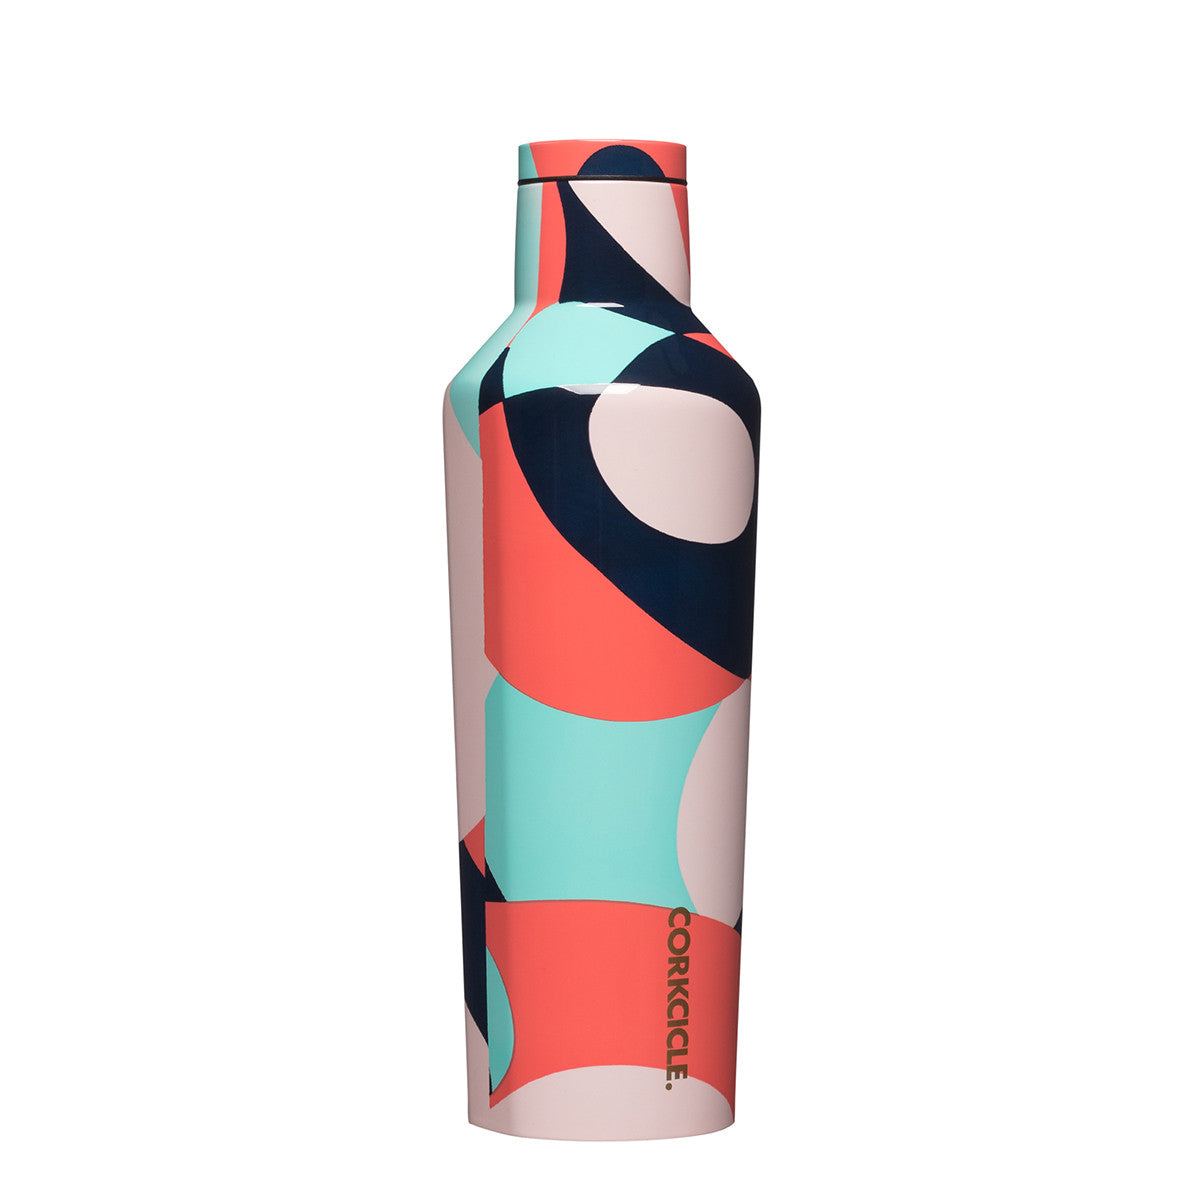 CORKCICLE Mod Canteen 475ml - Shout Insulated Stainless Steel Bottle